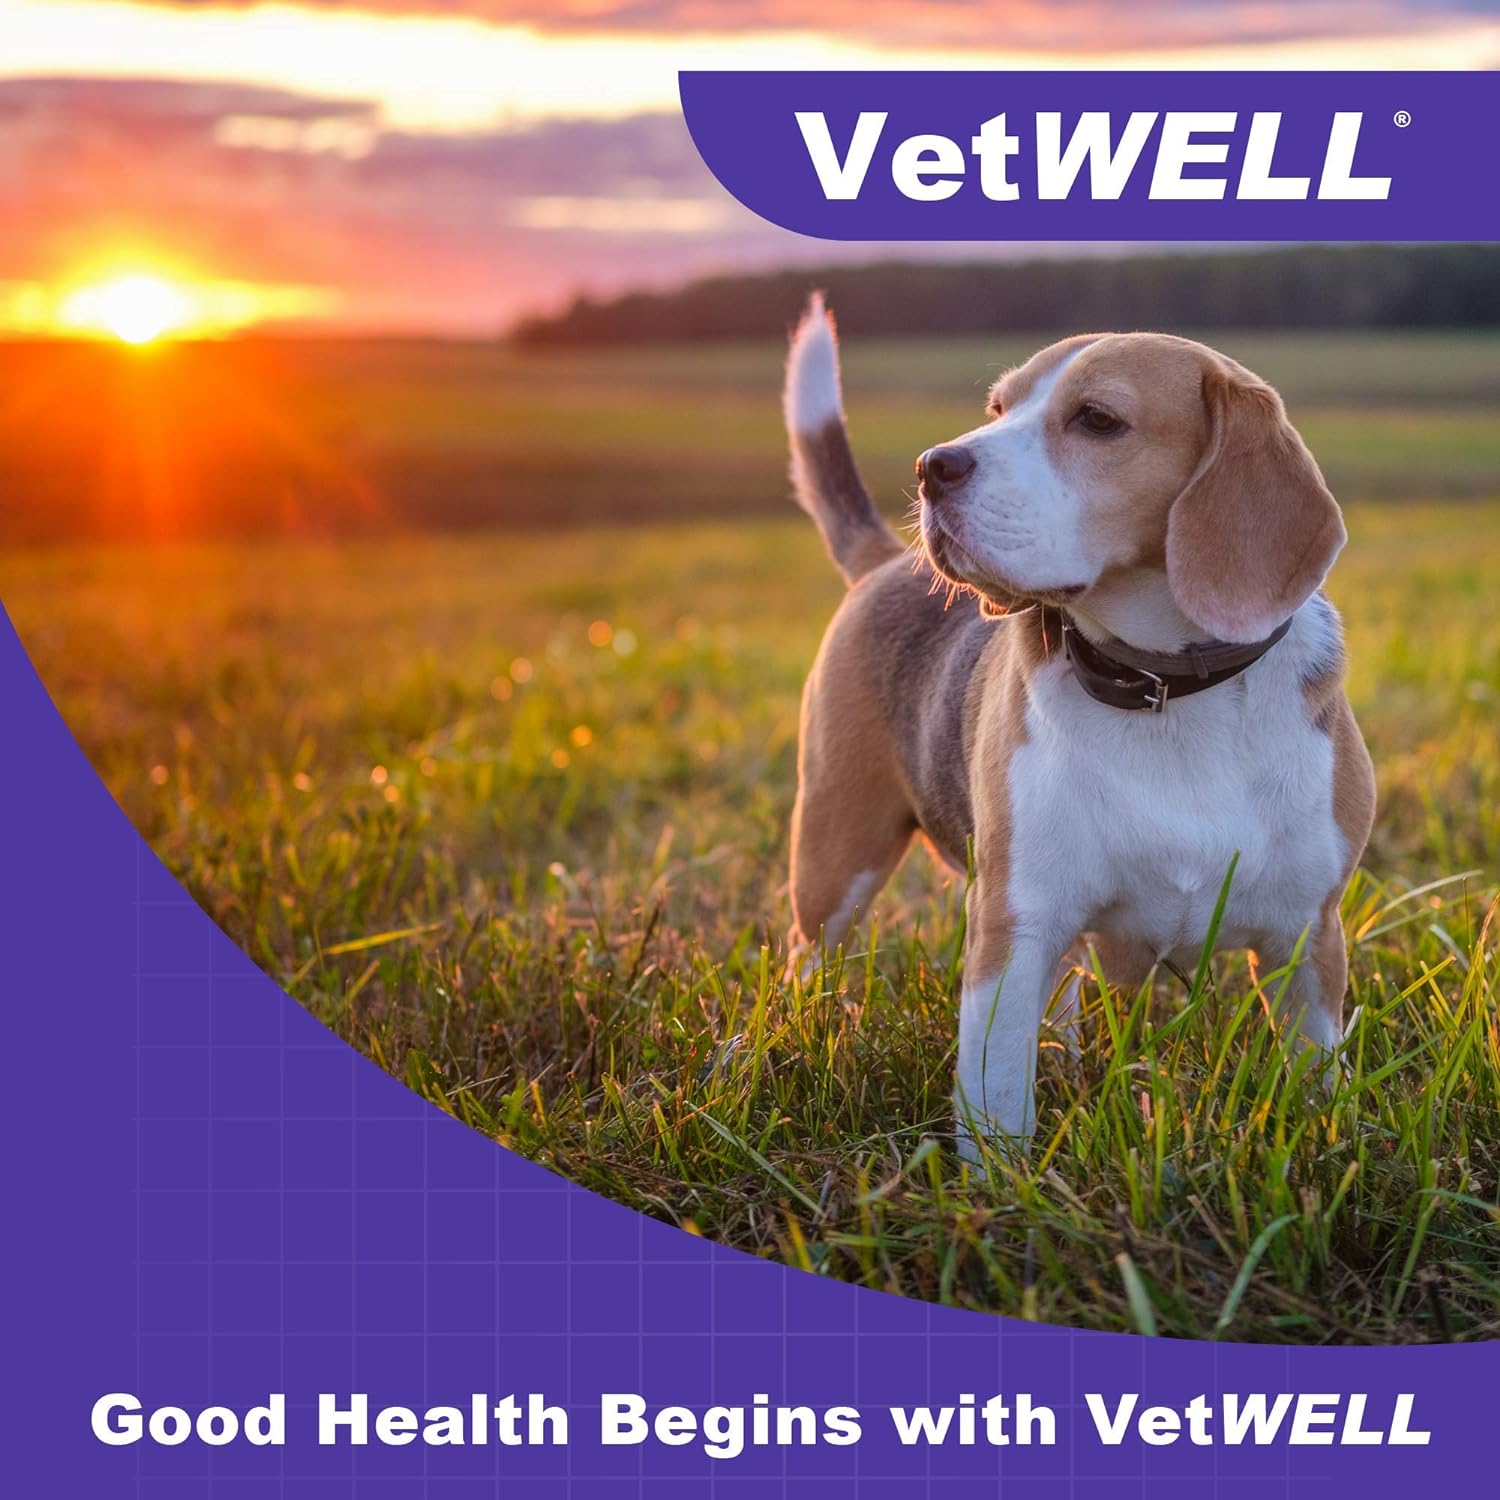 VetWELL Hydrocortisone Spray for Dogs & Cats - Itchy Skin Relief from Hot Spots, Bites, Scrapes, Irritated Skin, & Dermatitis - 4 oz Anti Itch Spray with Pramoxine : Pet Supplies